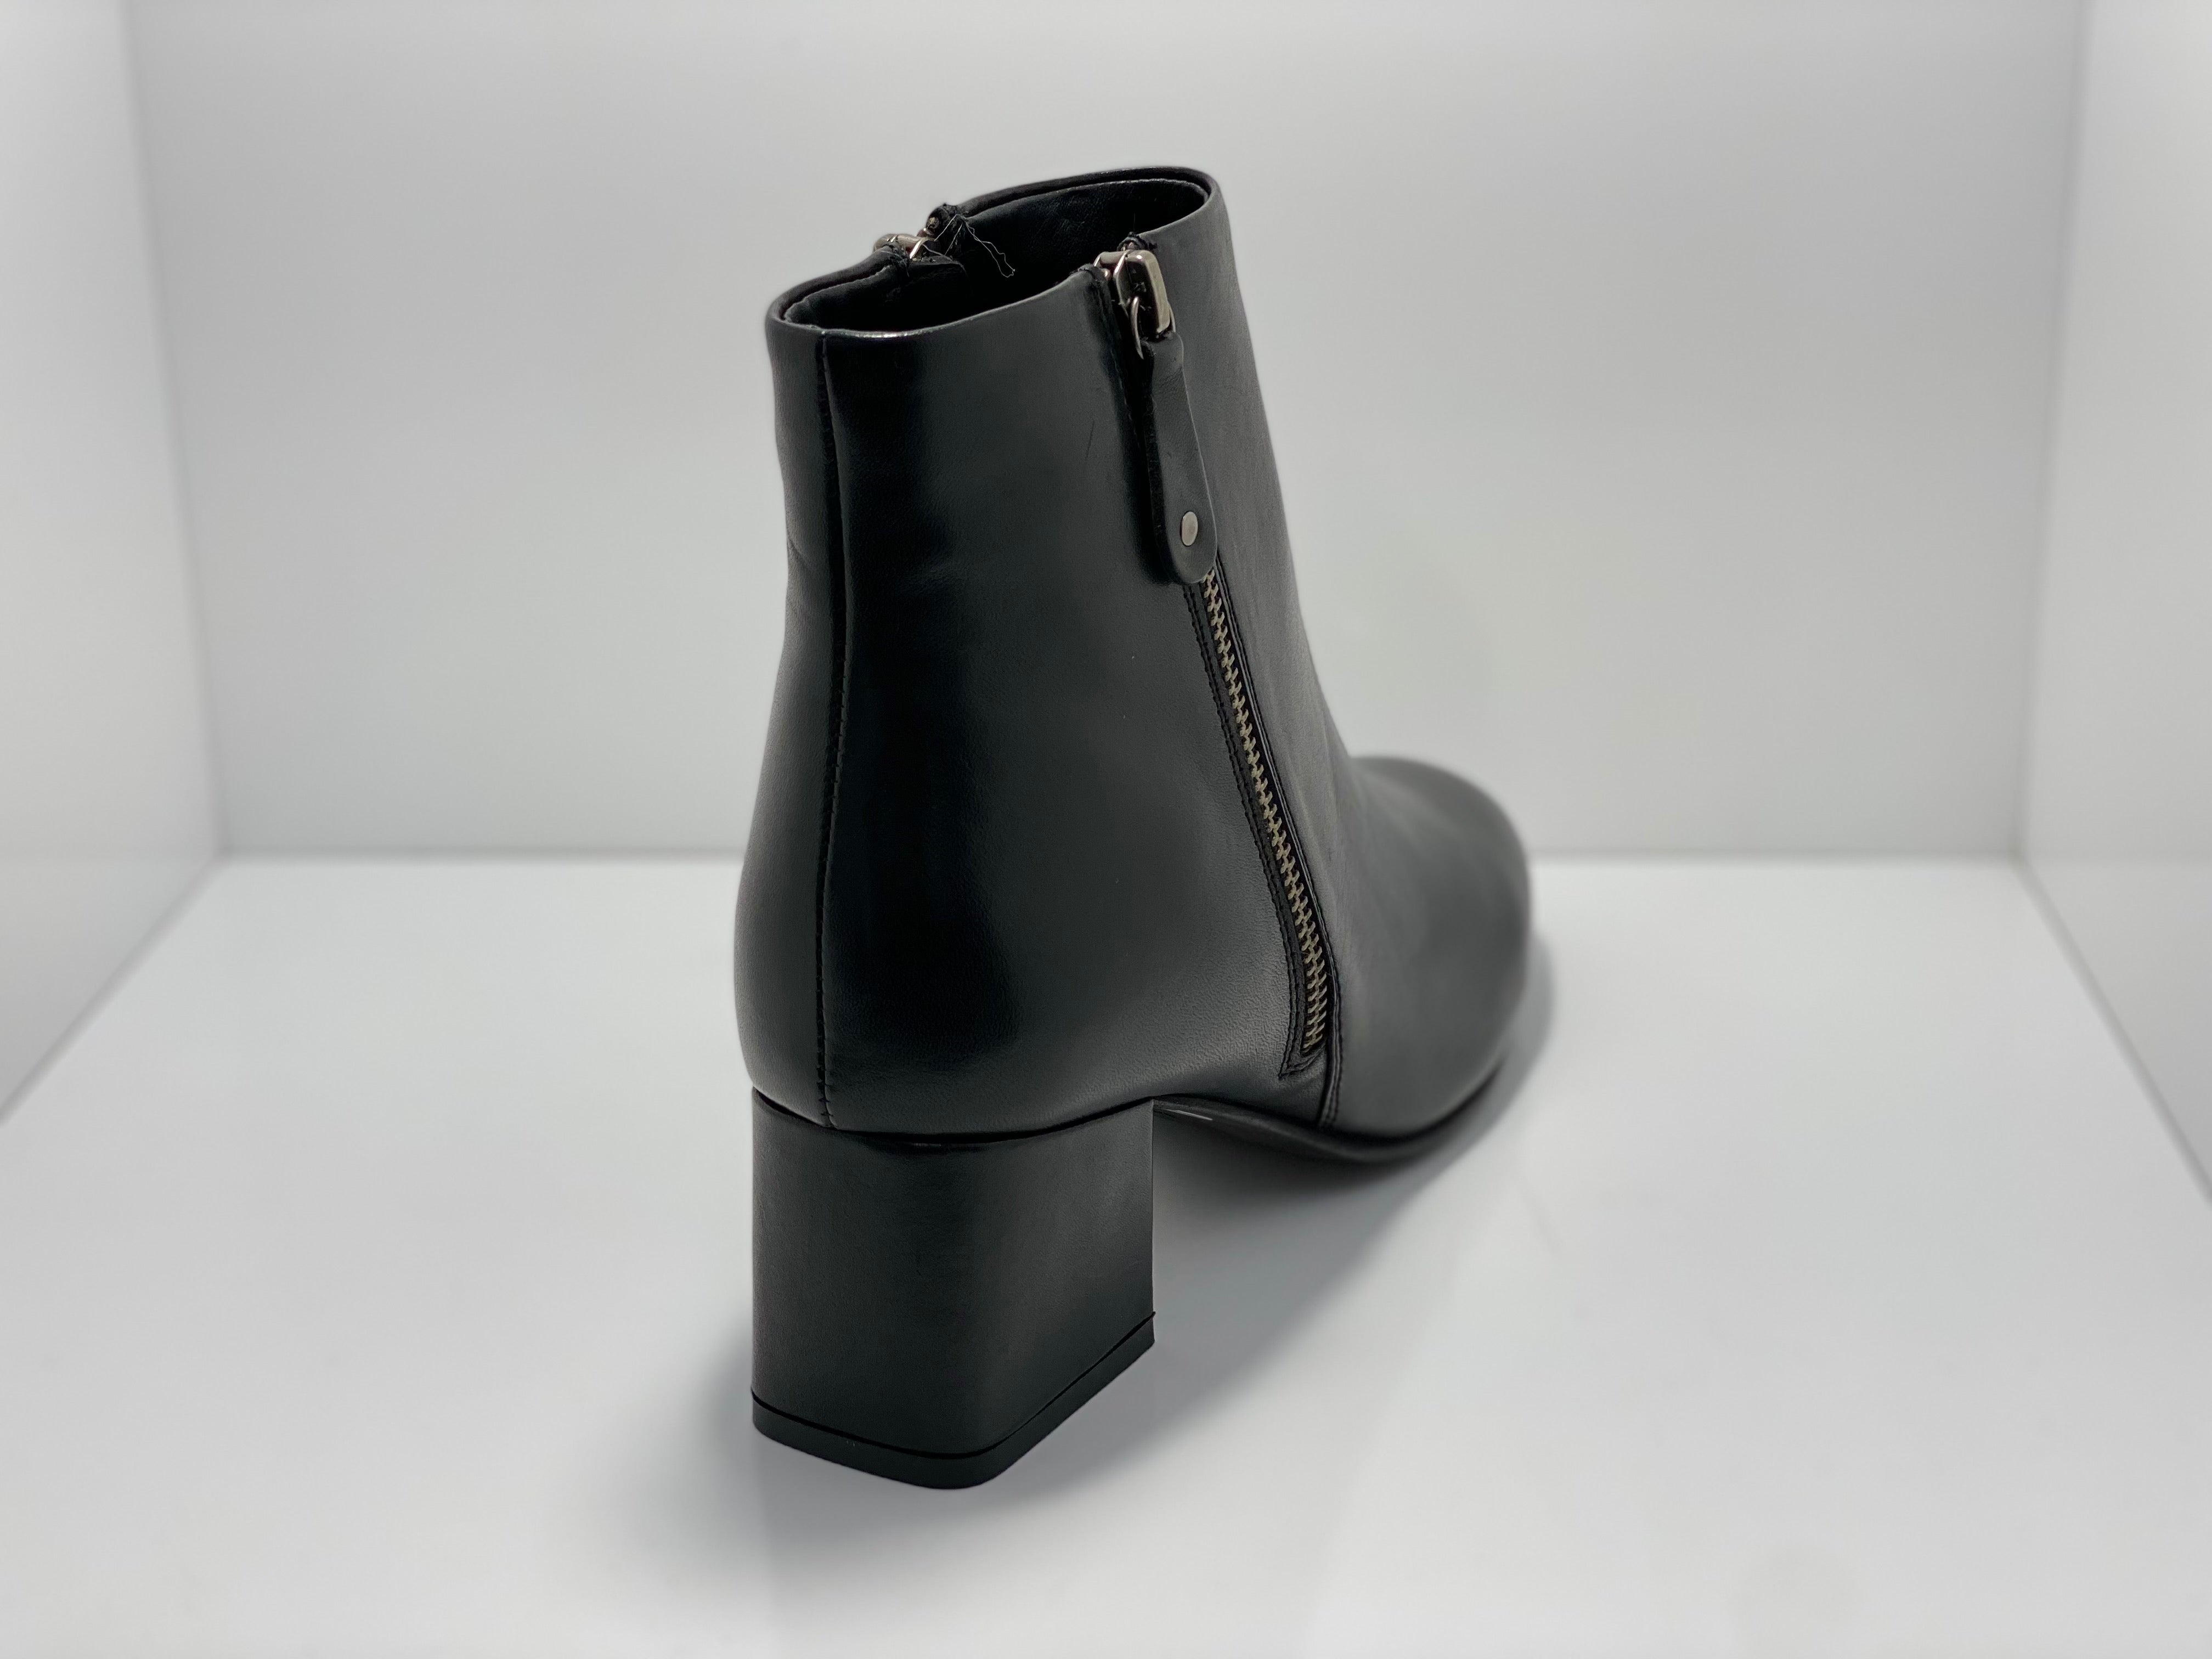 Quon Leather Boot